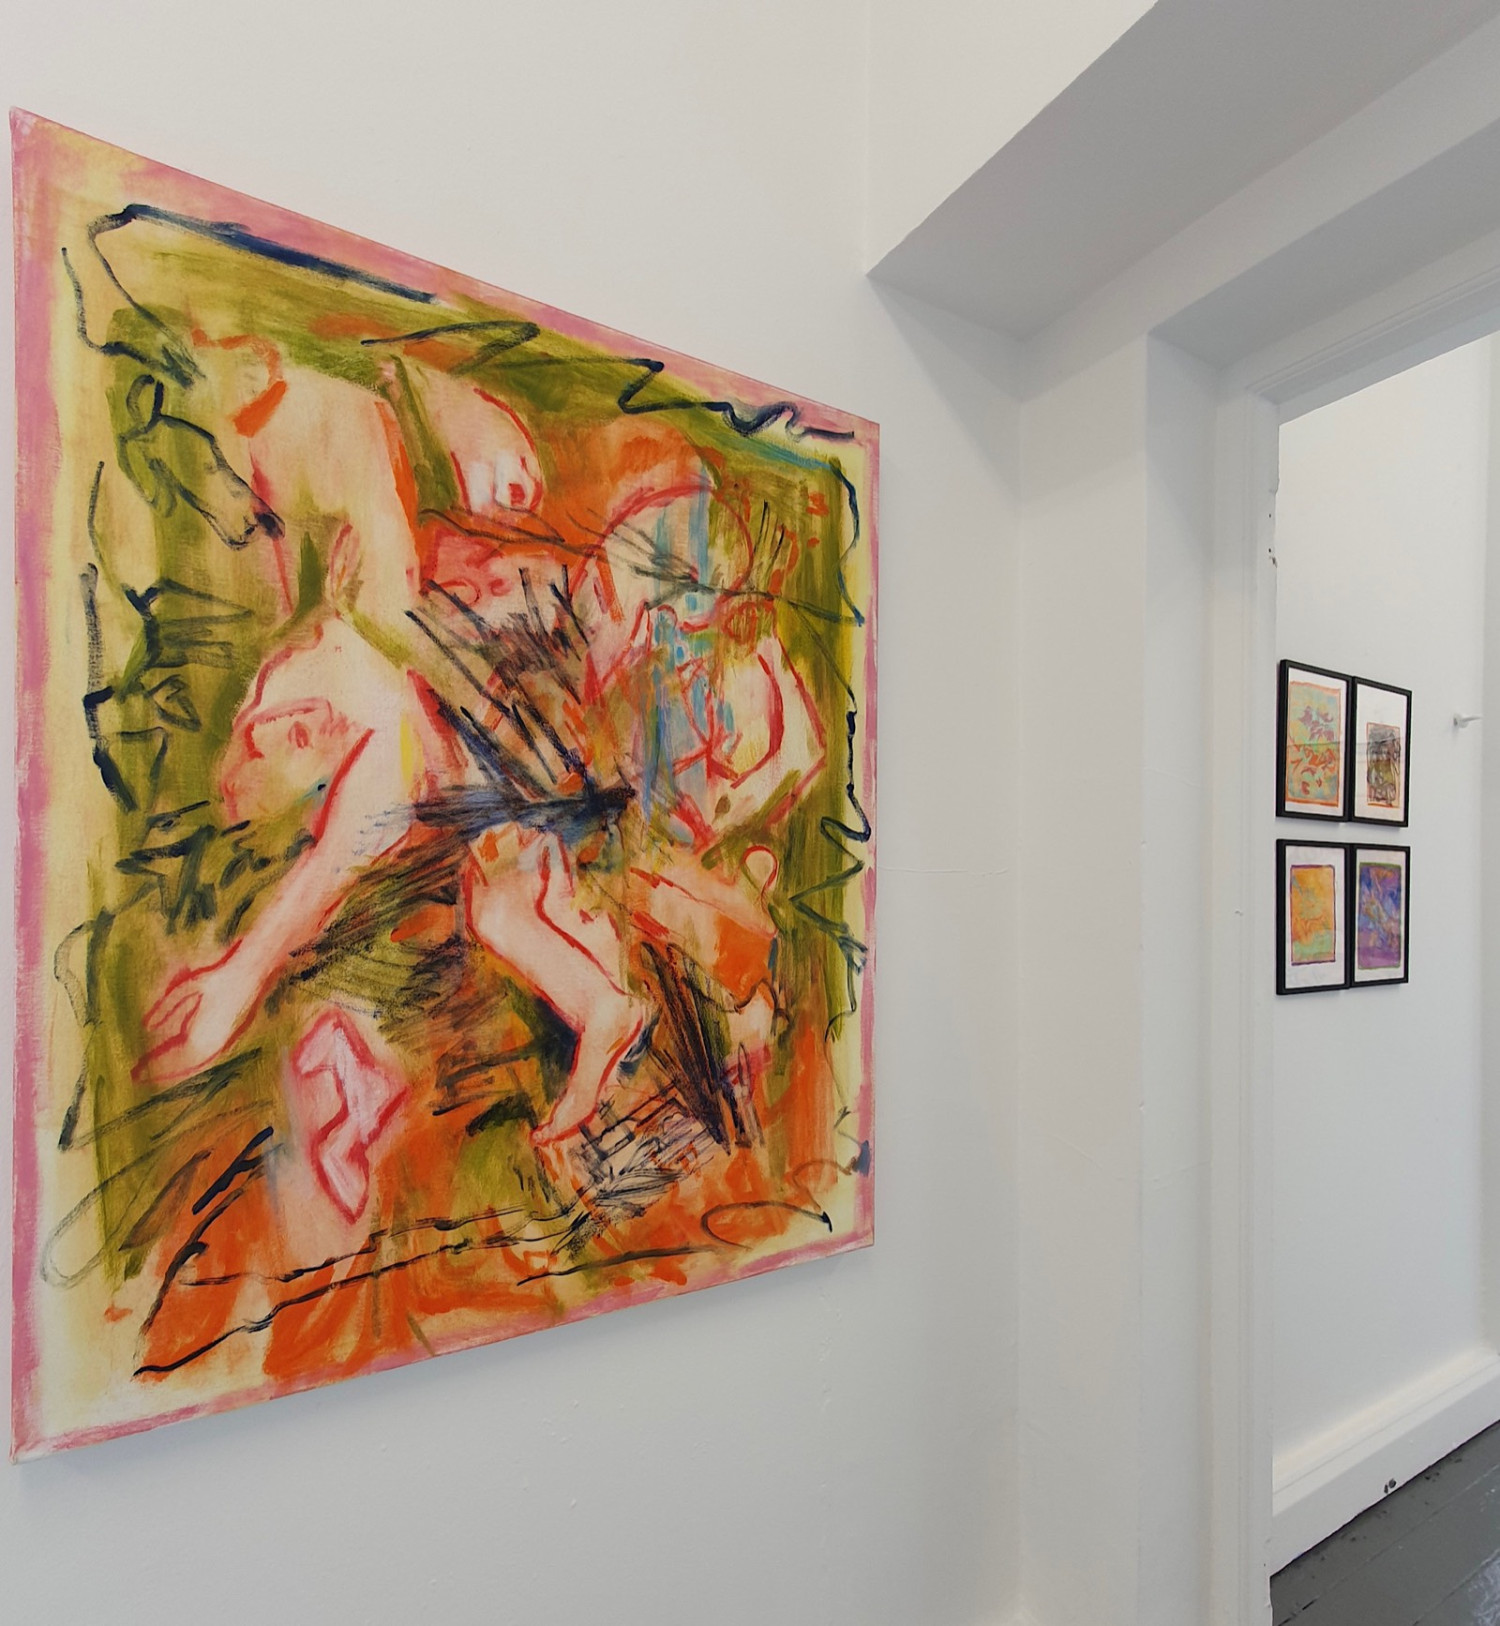 *Nudo Bathers*, oil on canvas, 90 x 125cm, installation view